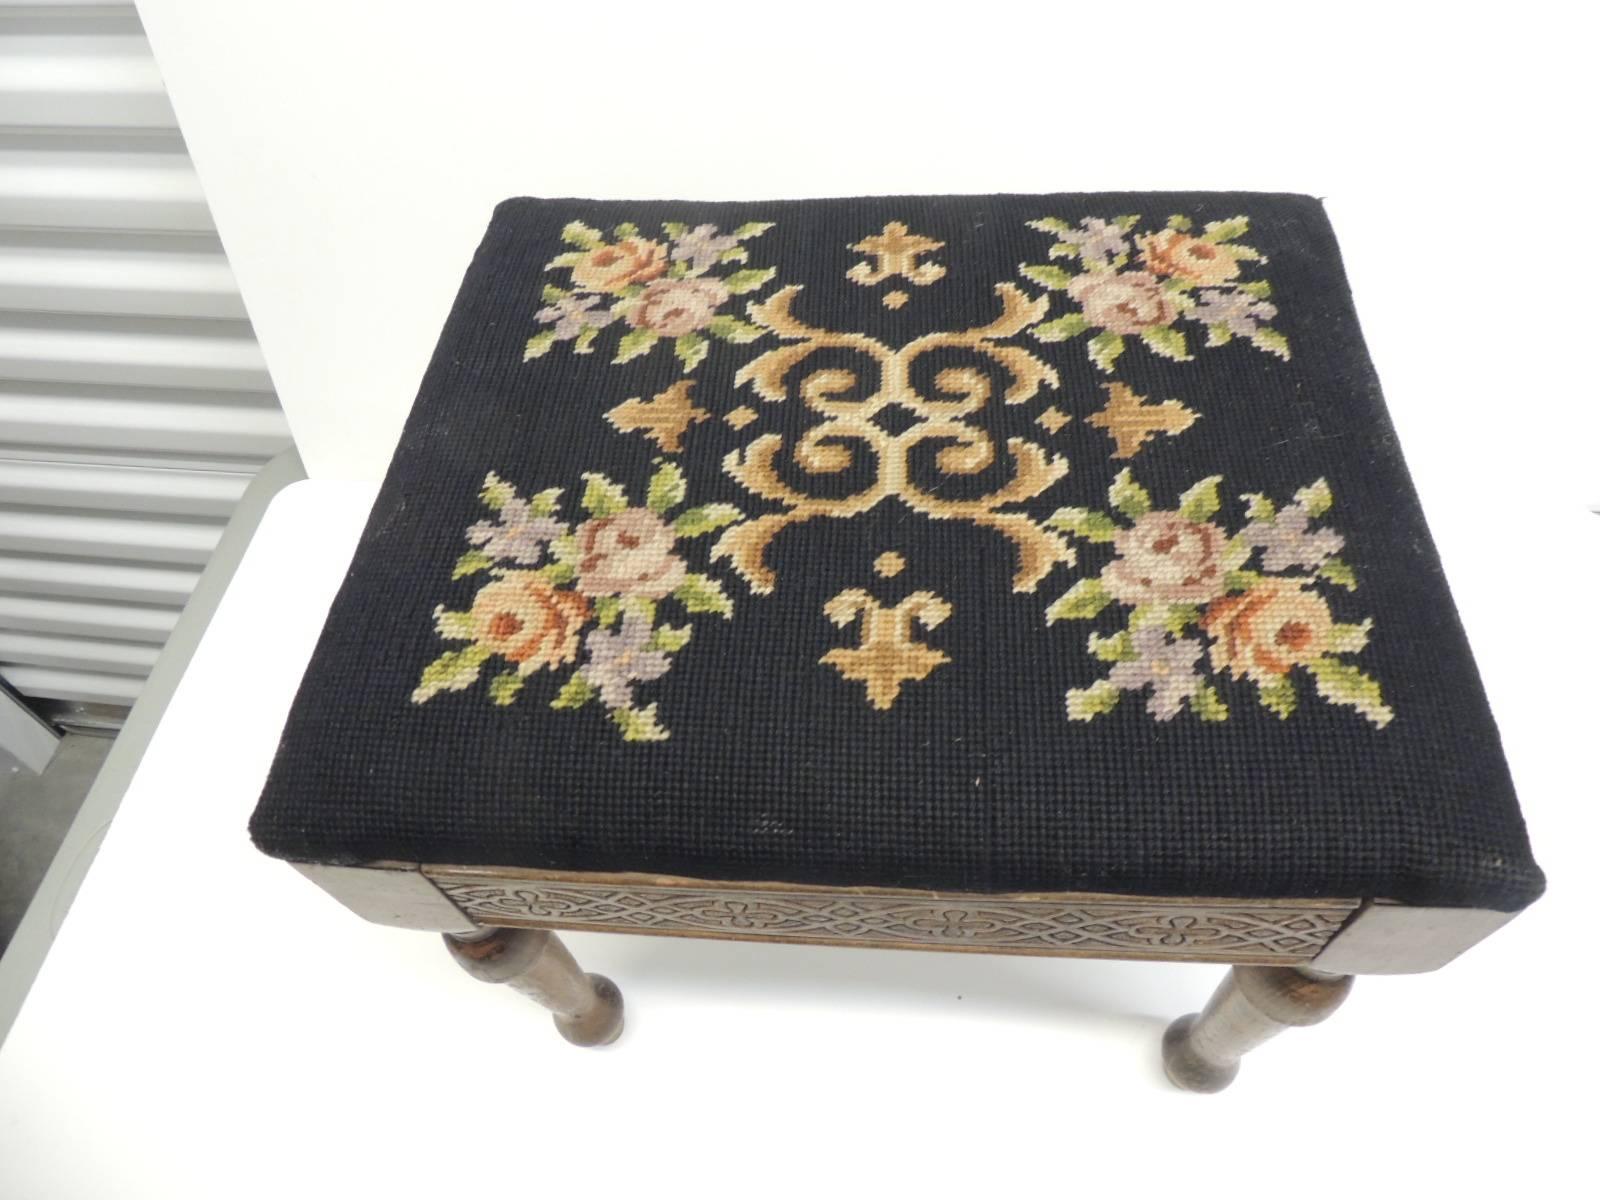 Gothic Revival Vintage Gothic Style Footstool Reupholstered with Floral Tapestry Louis XVI Styl